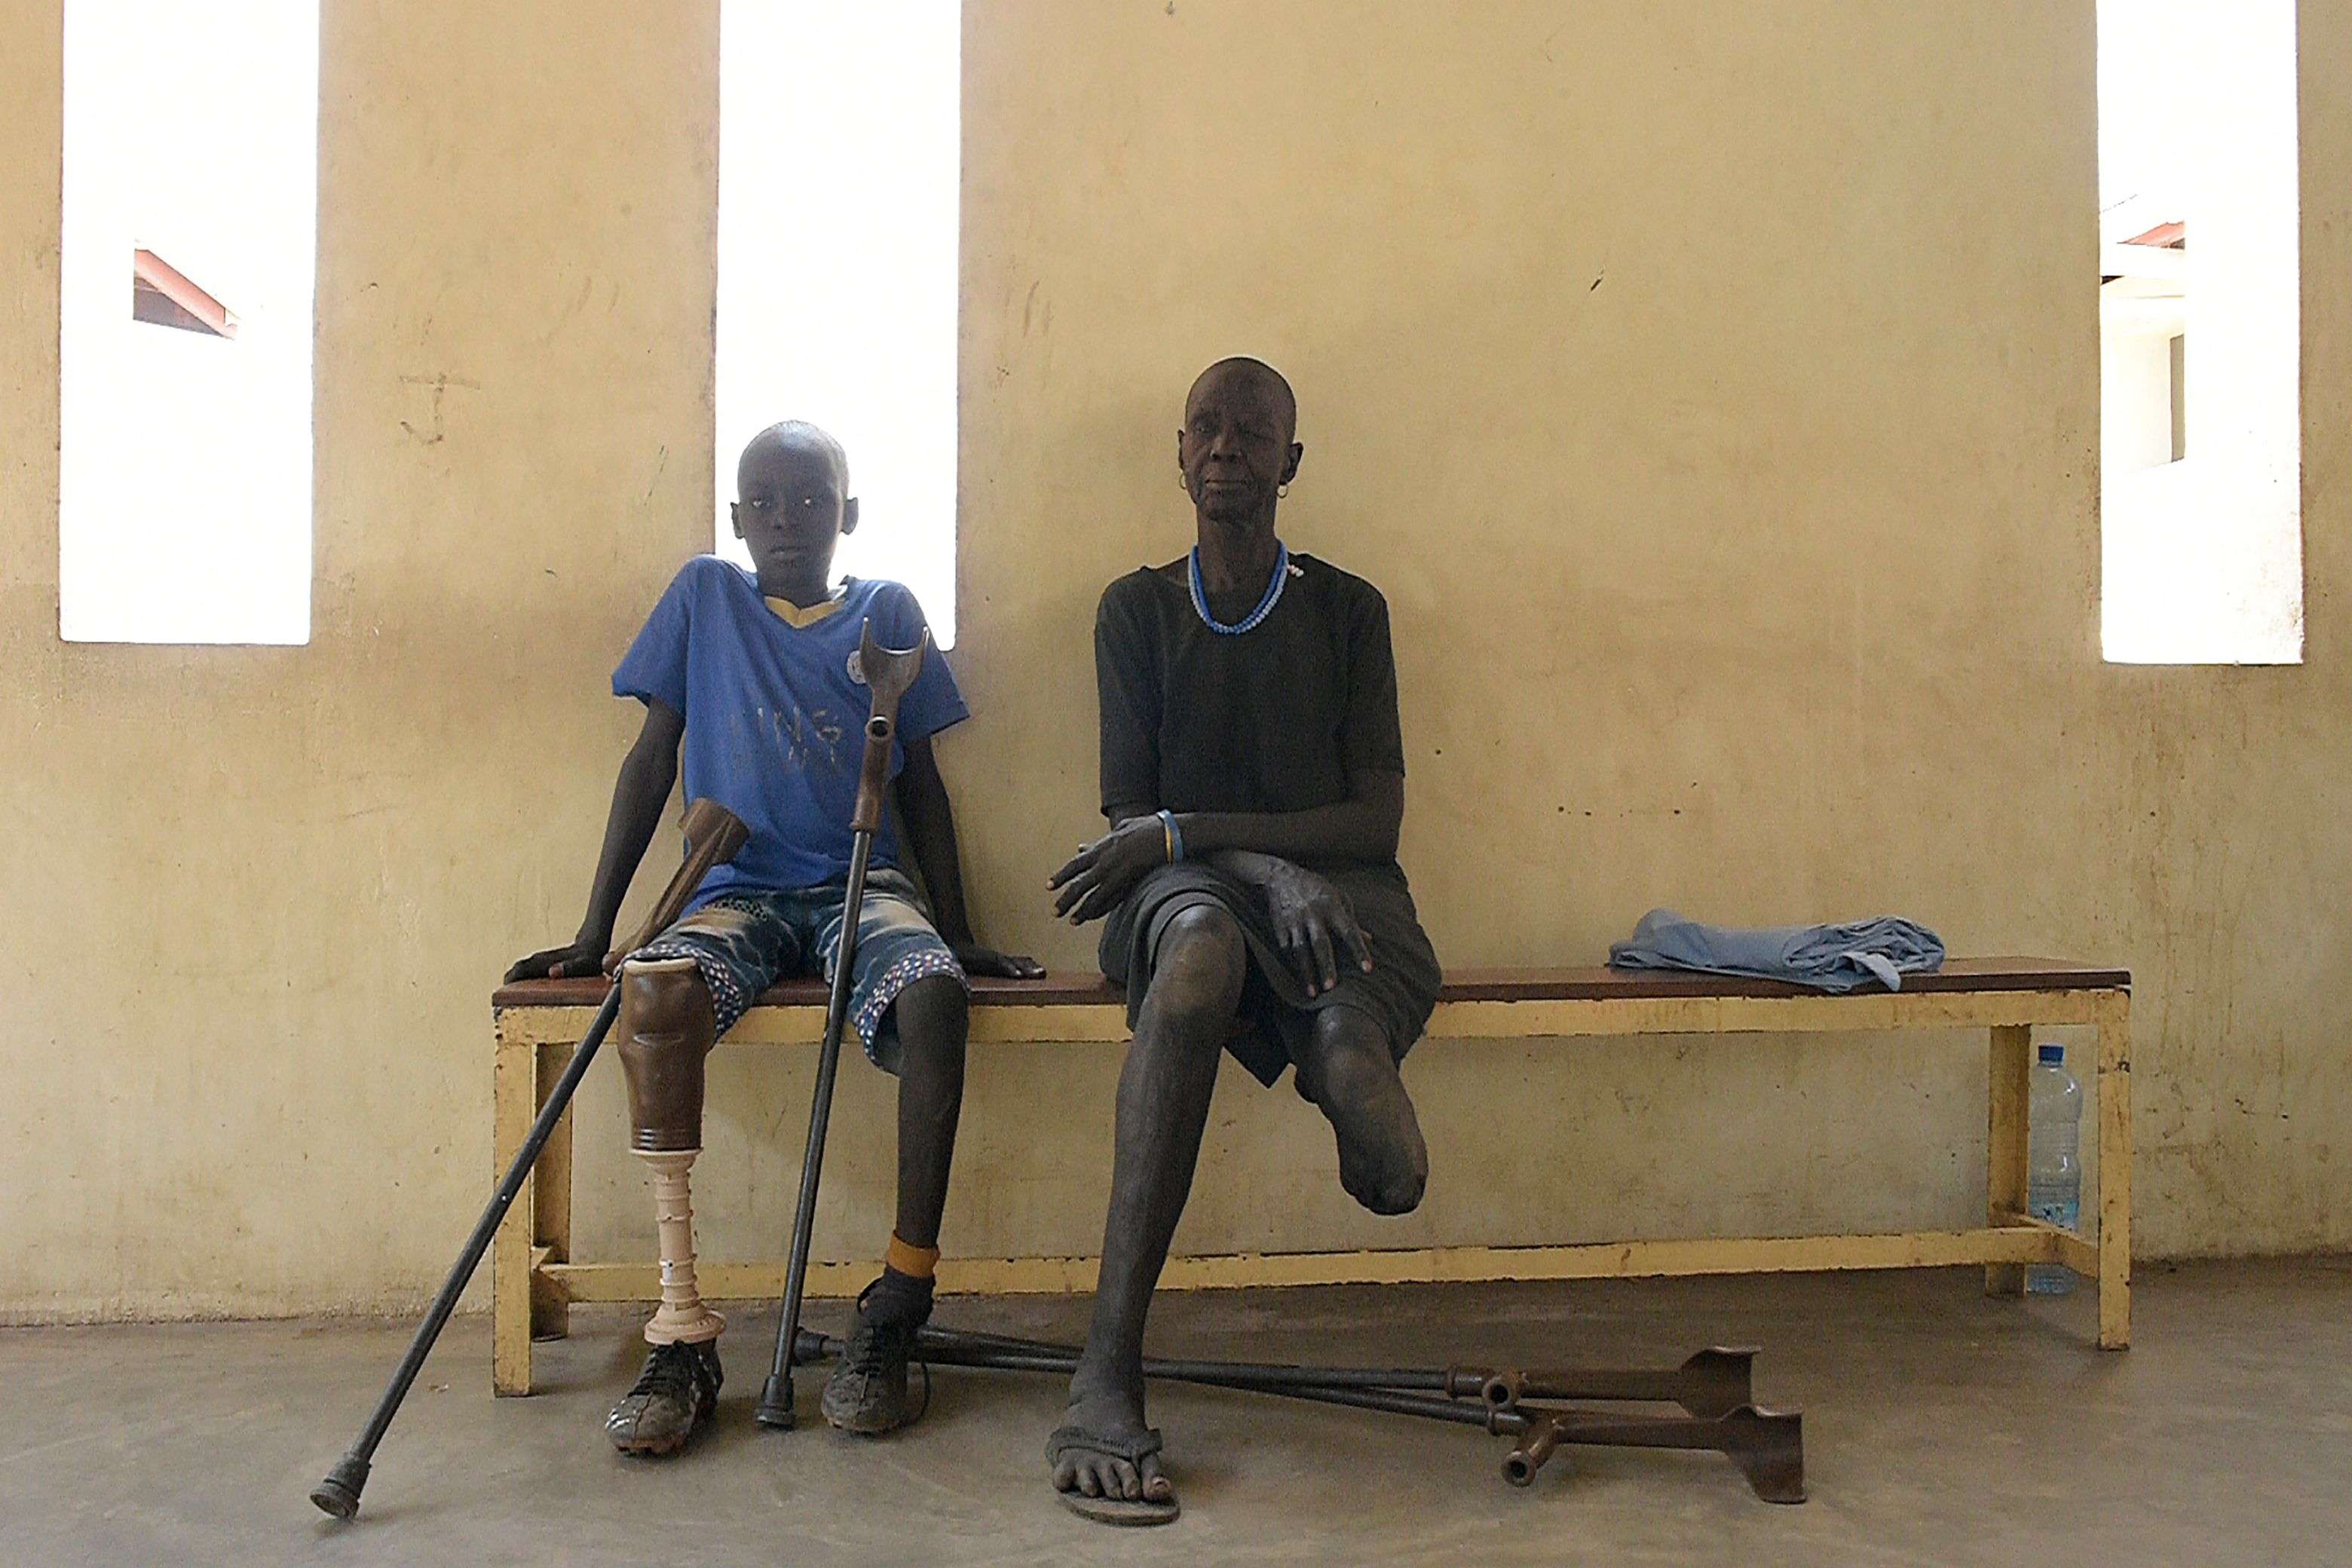 South Sudan's five-year-long civil war has left possibly tens of thousands of people without limbs